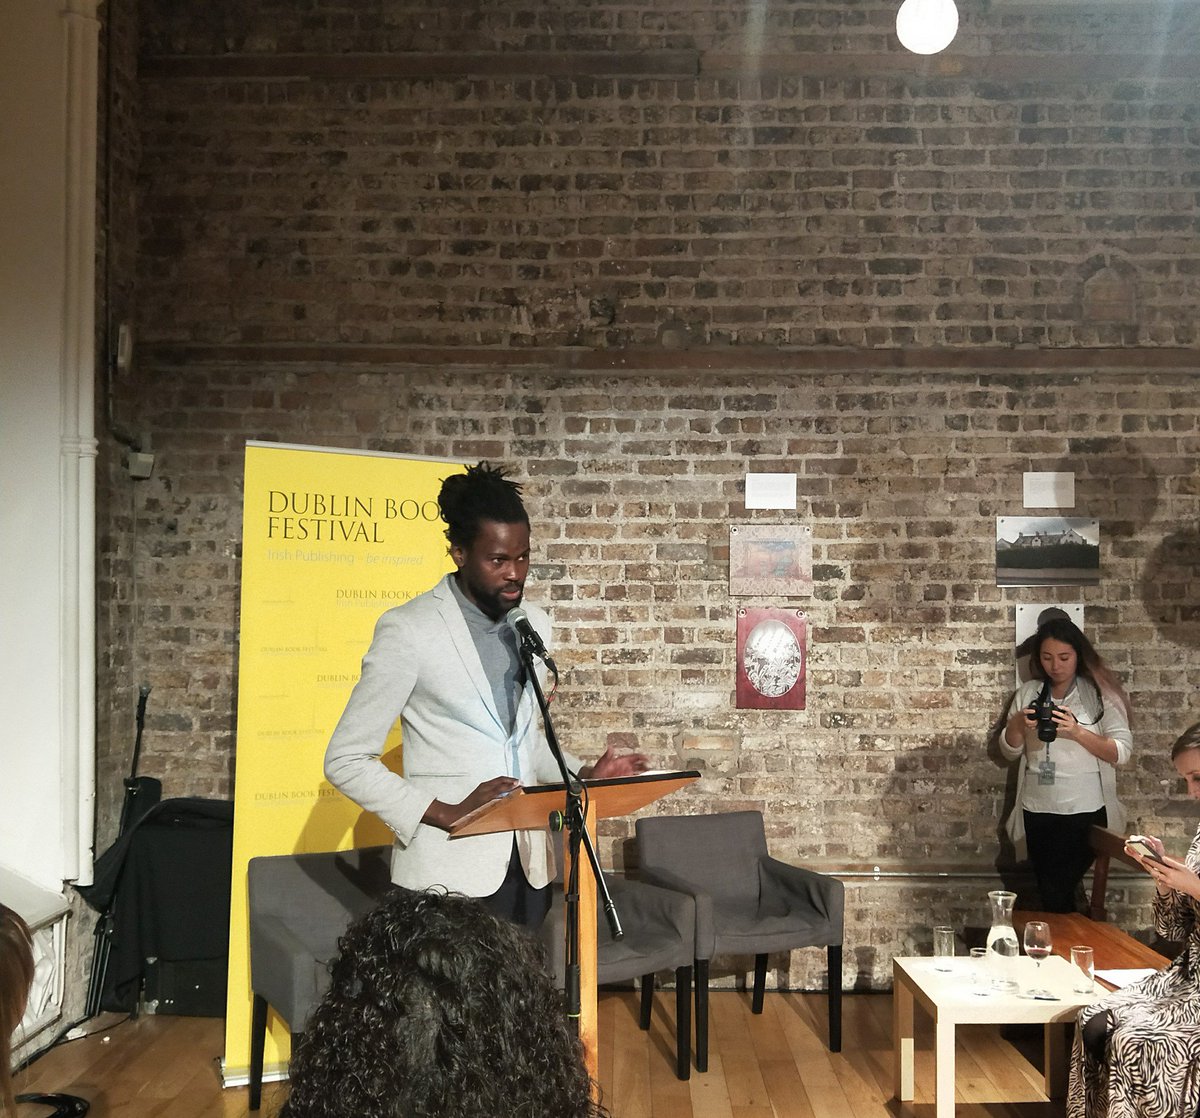 The launch of Correspondences felt like such a historic moment. A beautiful call to end Direct Provision from people affected by it. Congrats to @JessicaTraynor6 and all involved! #YoungWriterDelegates @IrishWritersCtr